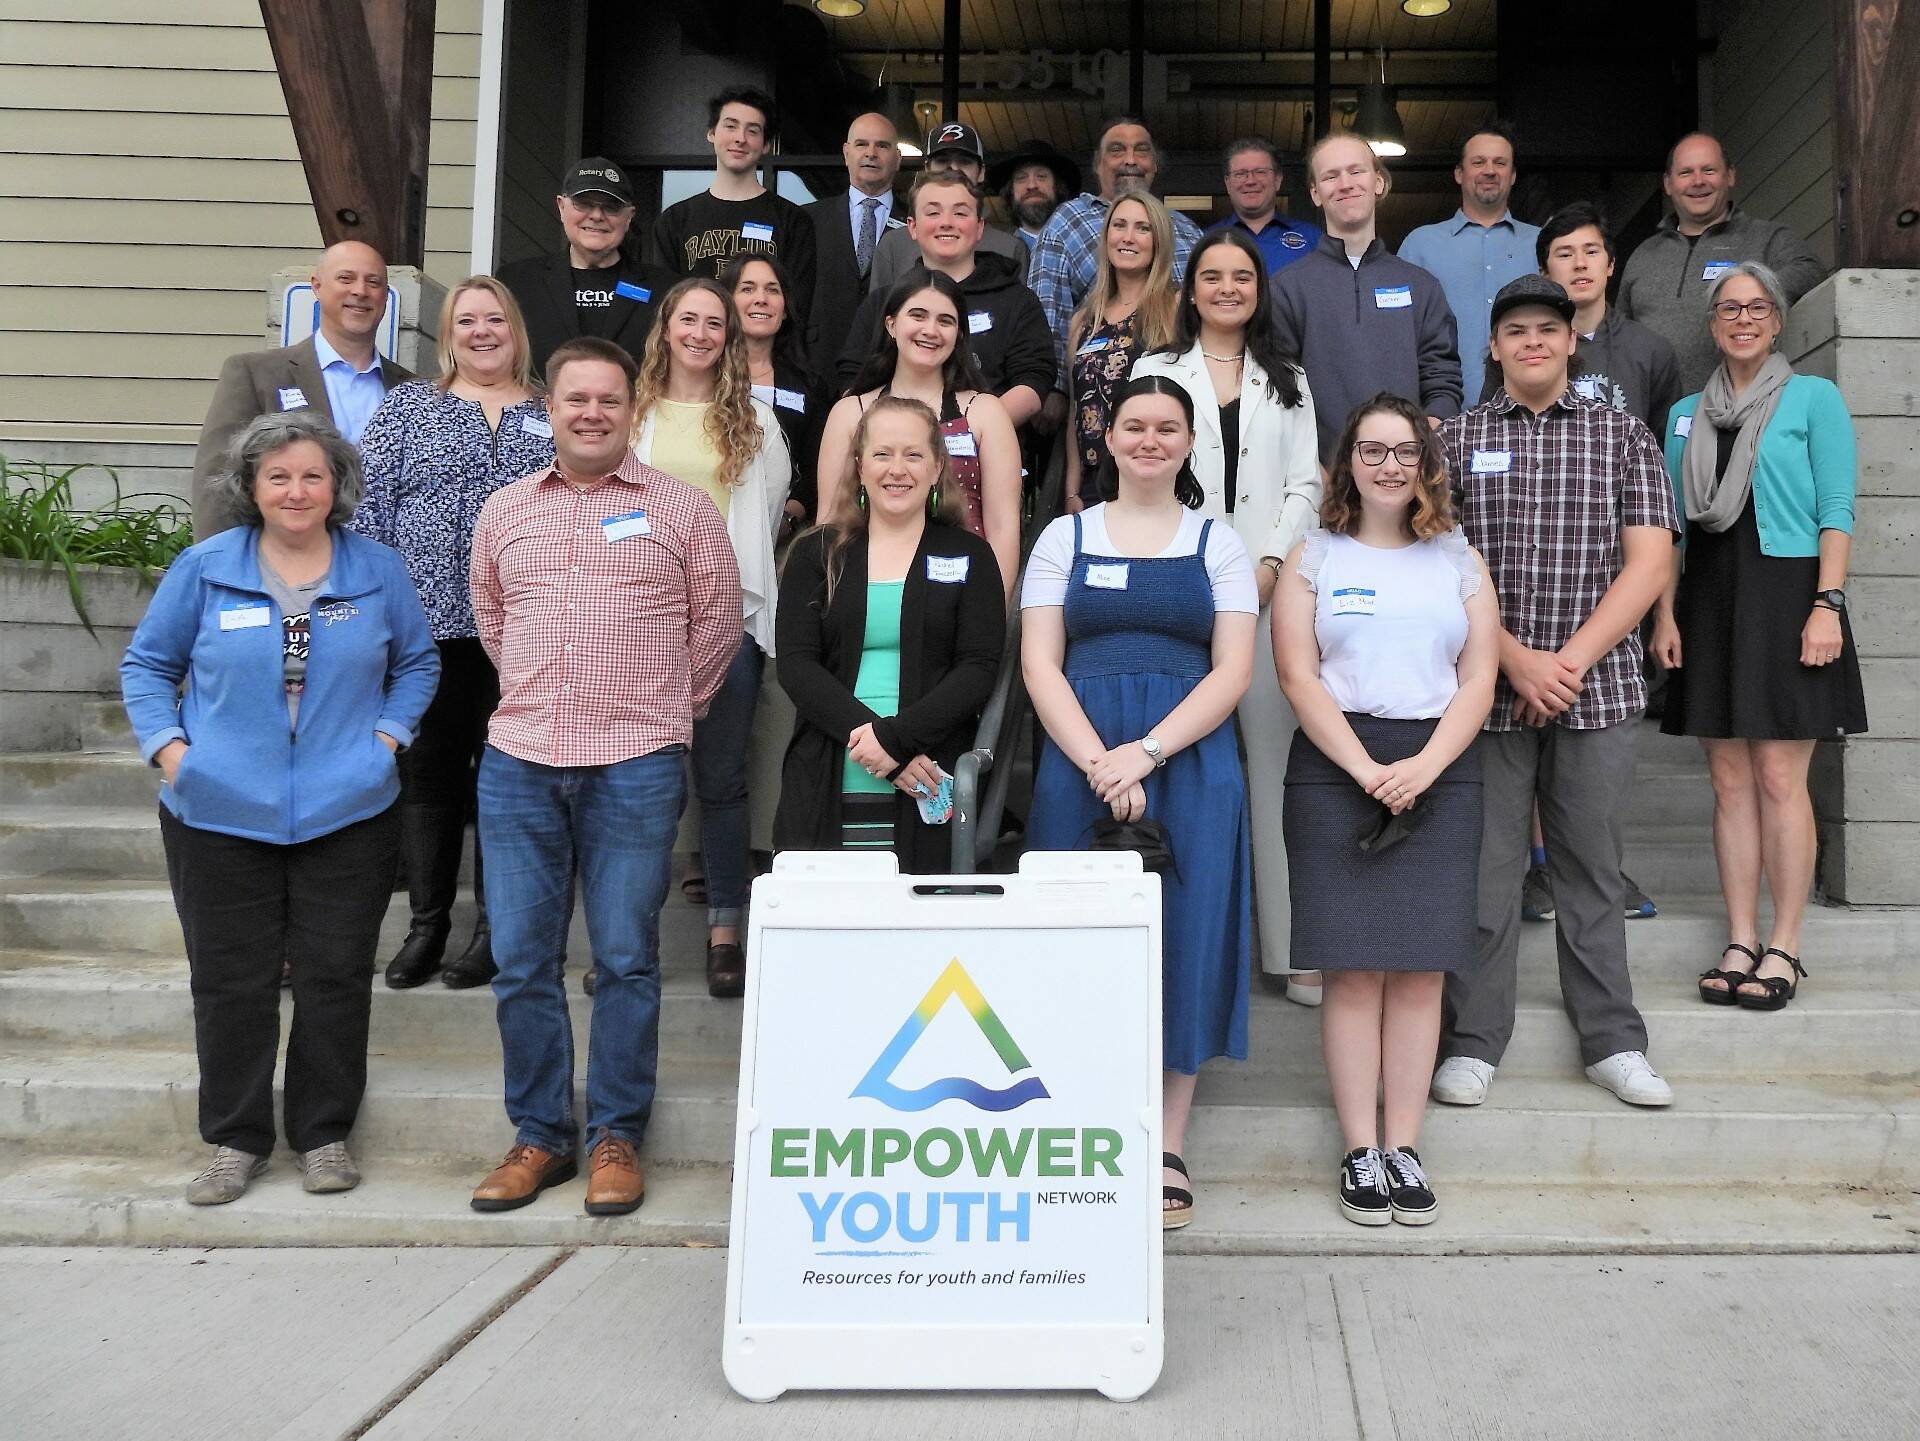 File photo 
Nominees at the Empower Youth Network 2022 Rise & Shine Volunteer Recognition Breakfast on June 8. Voters chose Empower as the best nonprofit in this year’s Best of the Valley contest.